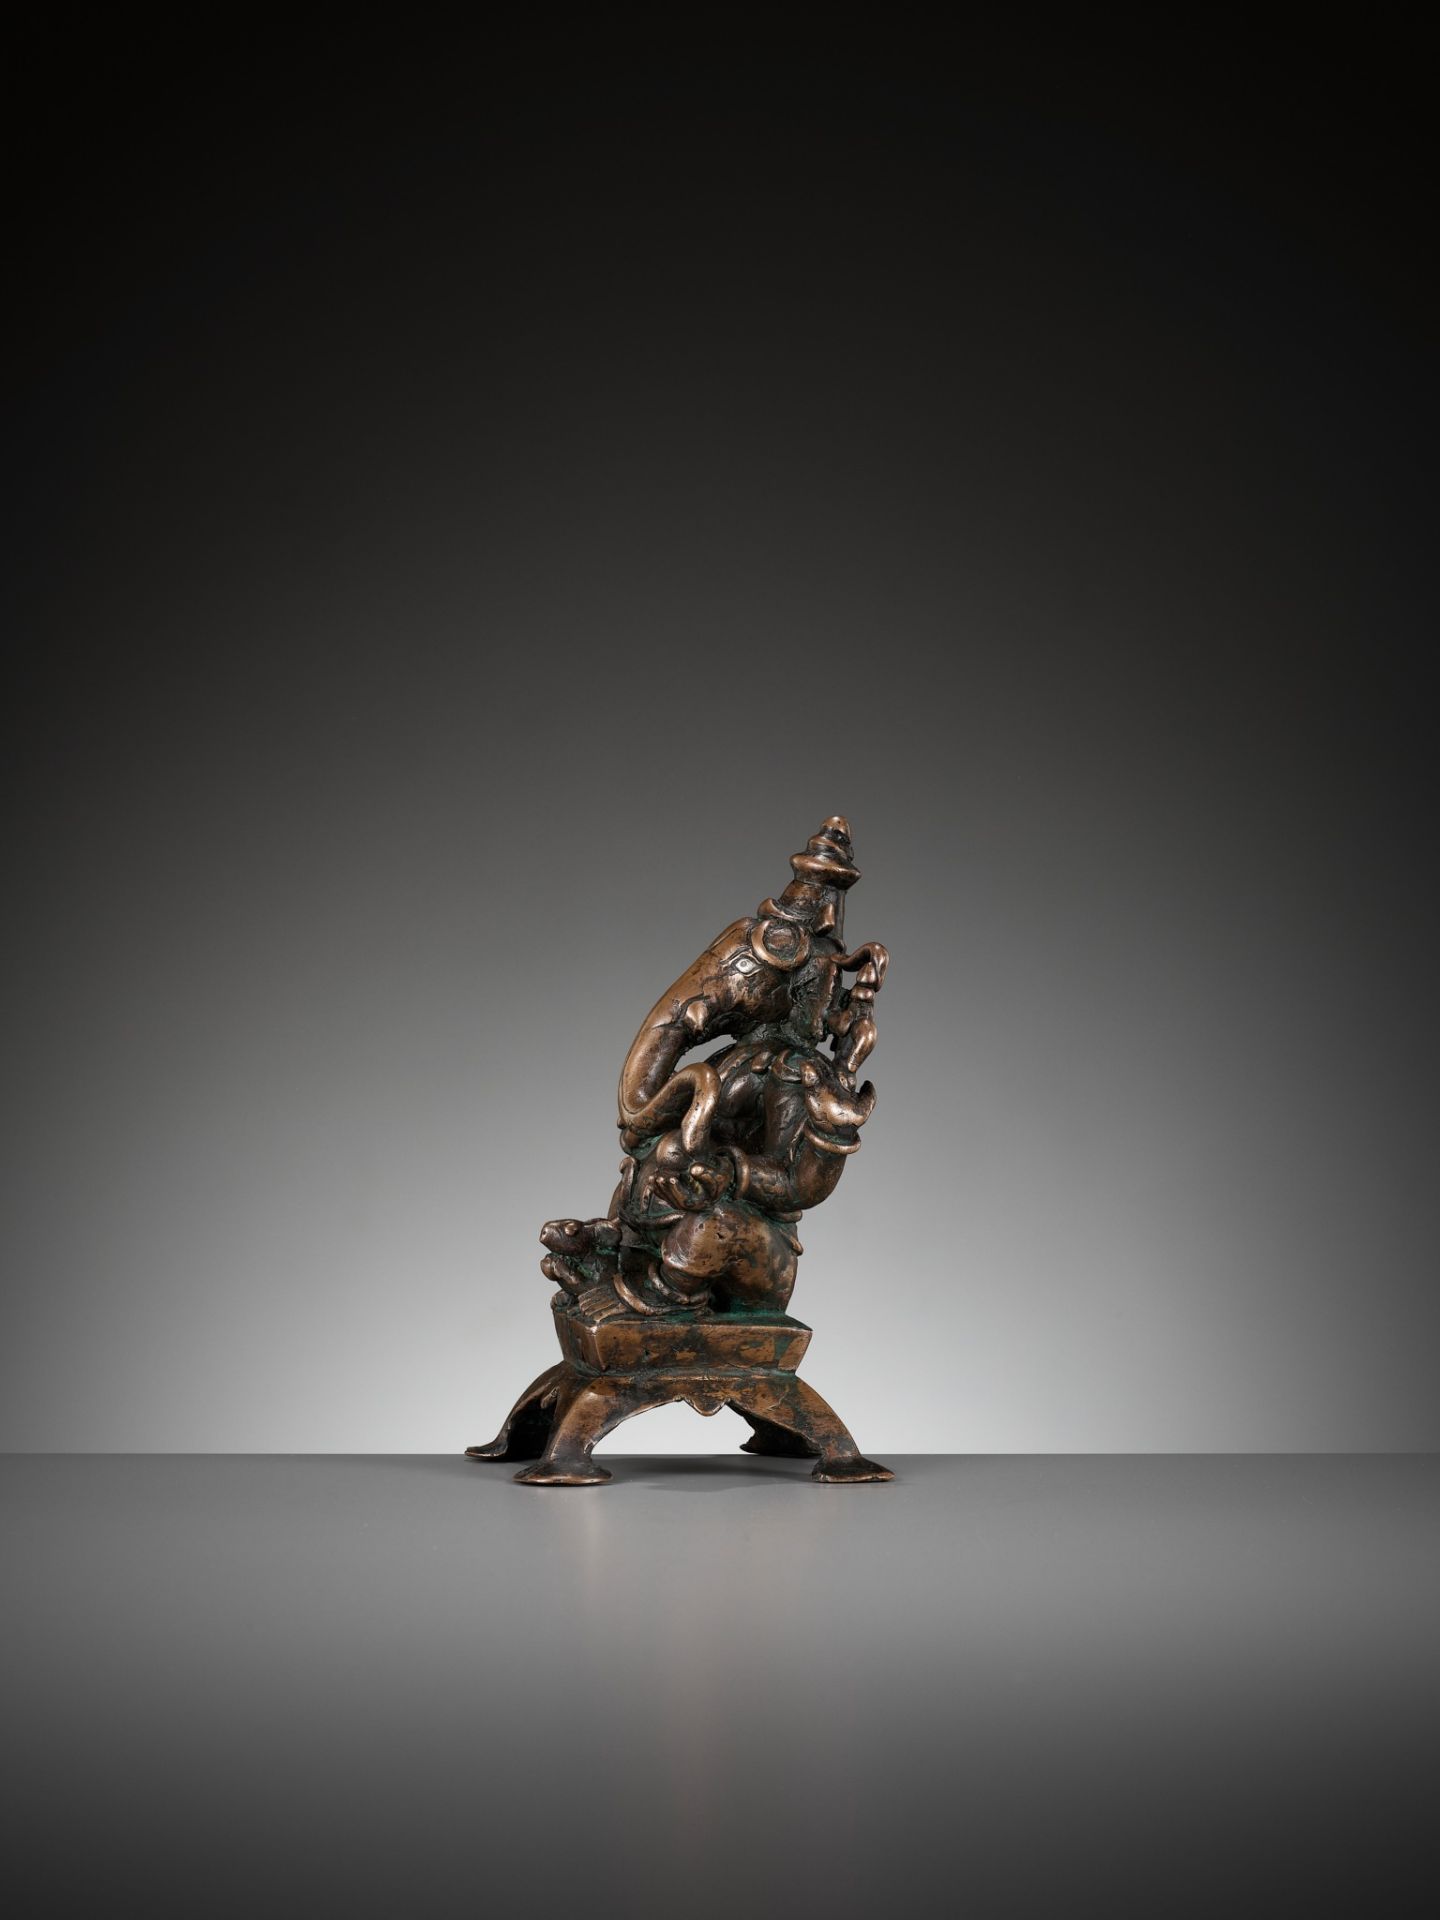 A SILVER-INLAID COPPER ALLOY FIGURE OF GANESHA, SOUTH INDIA, C. 1650-1750 - Image 7 of 12